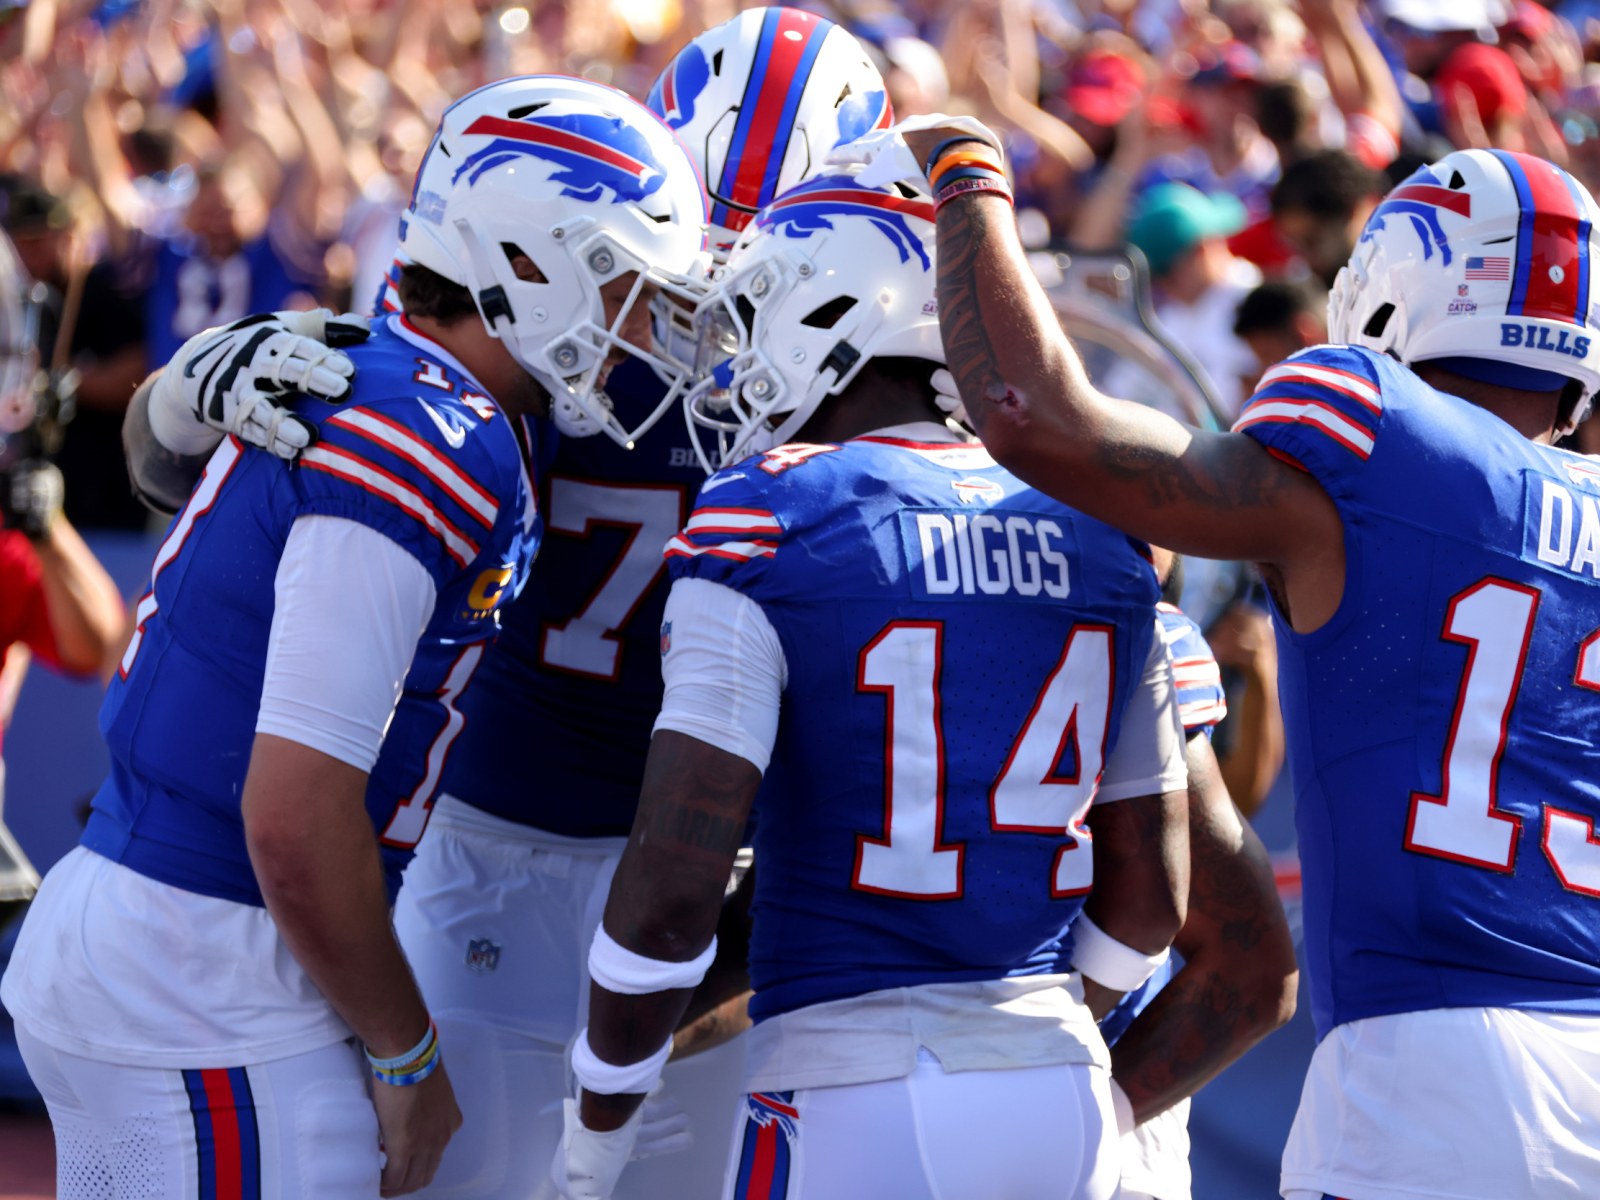 How to Watch Bills vs Dolphins Game Online for Free